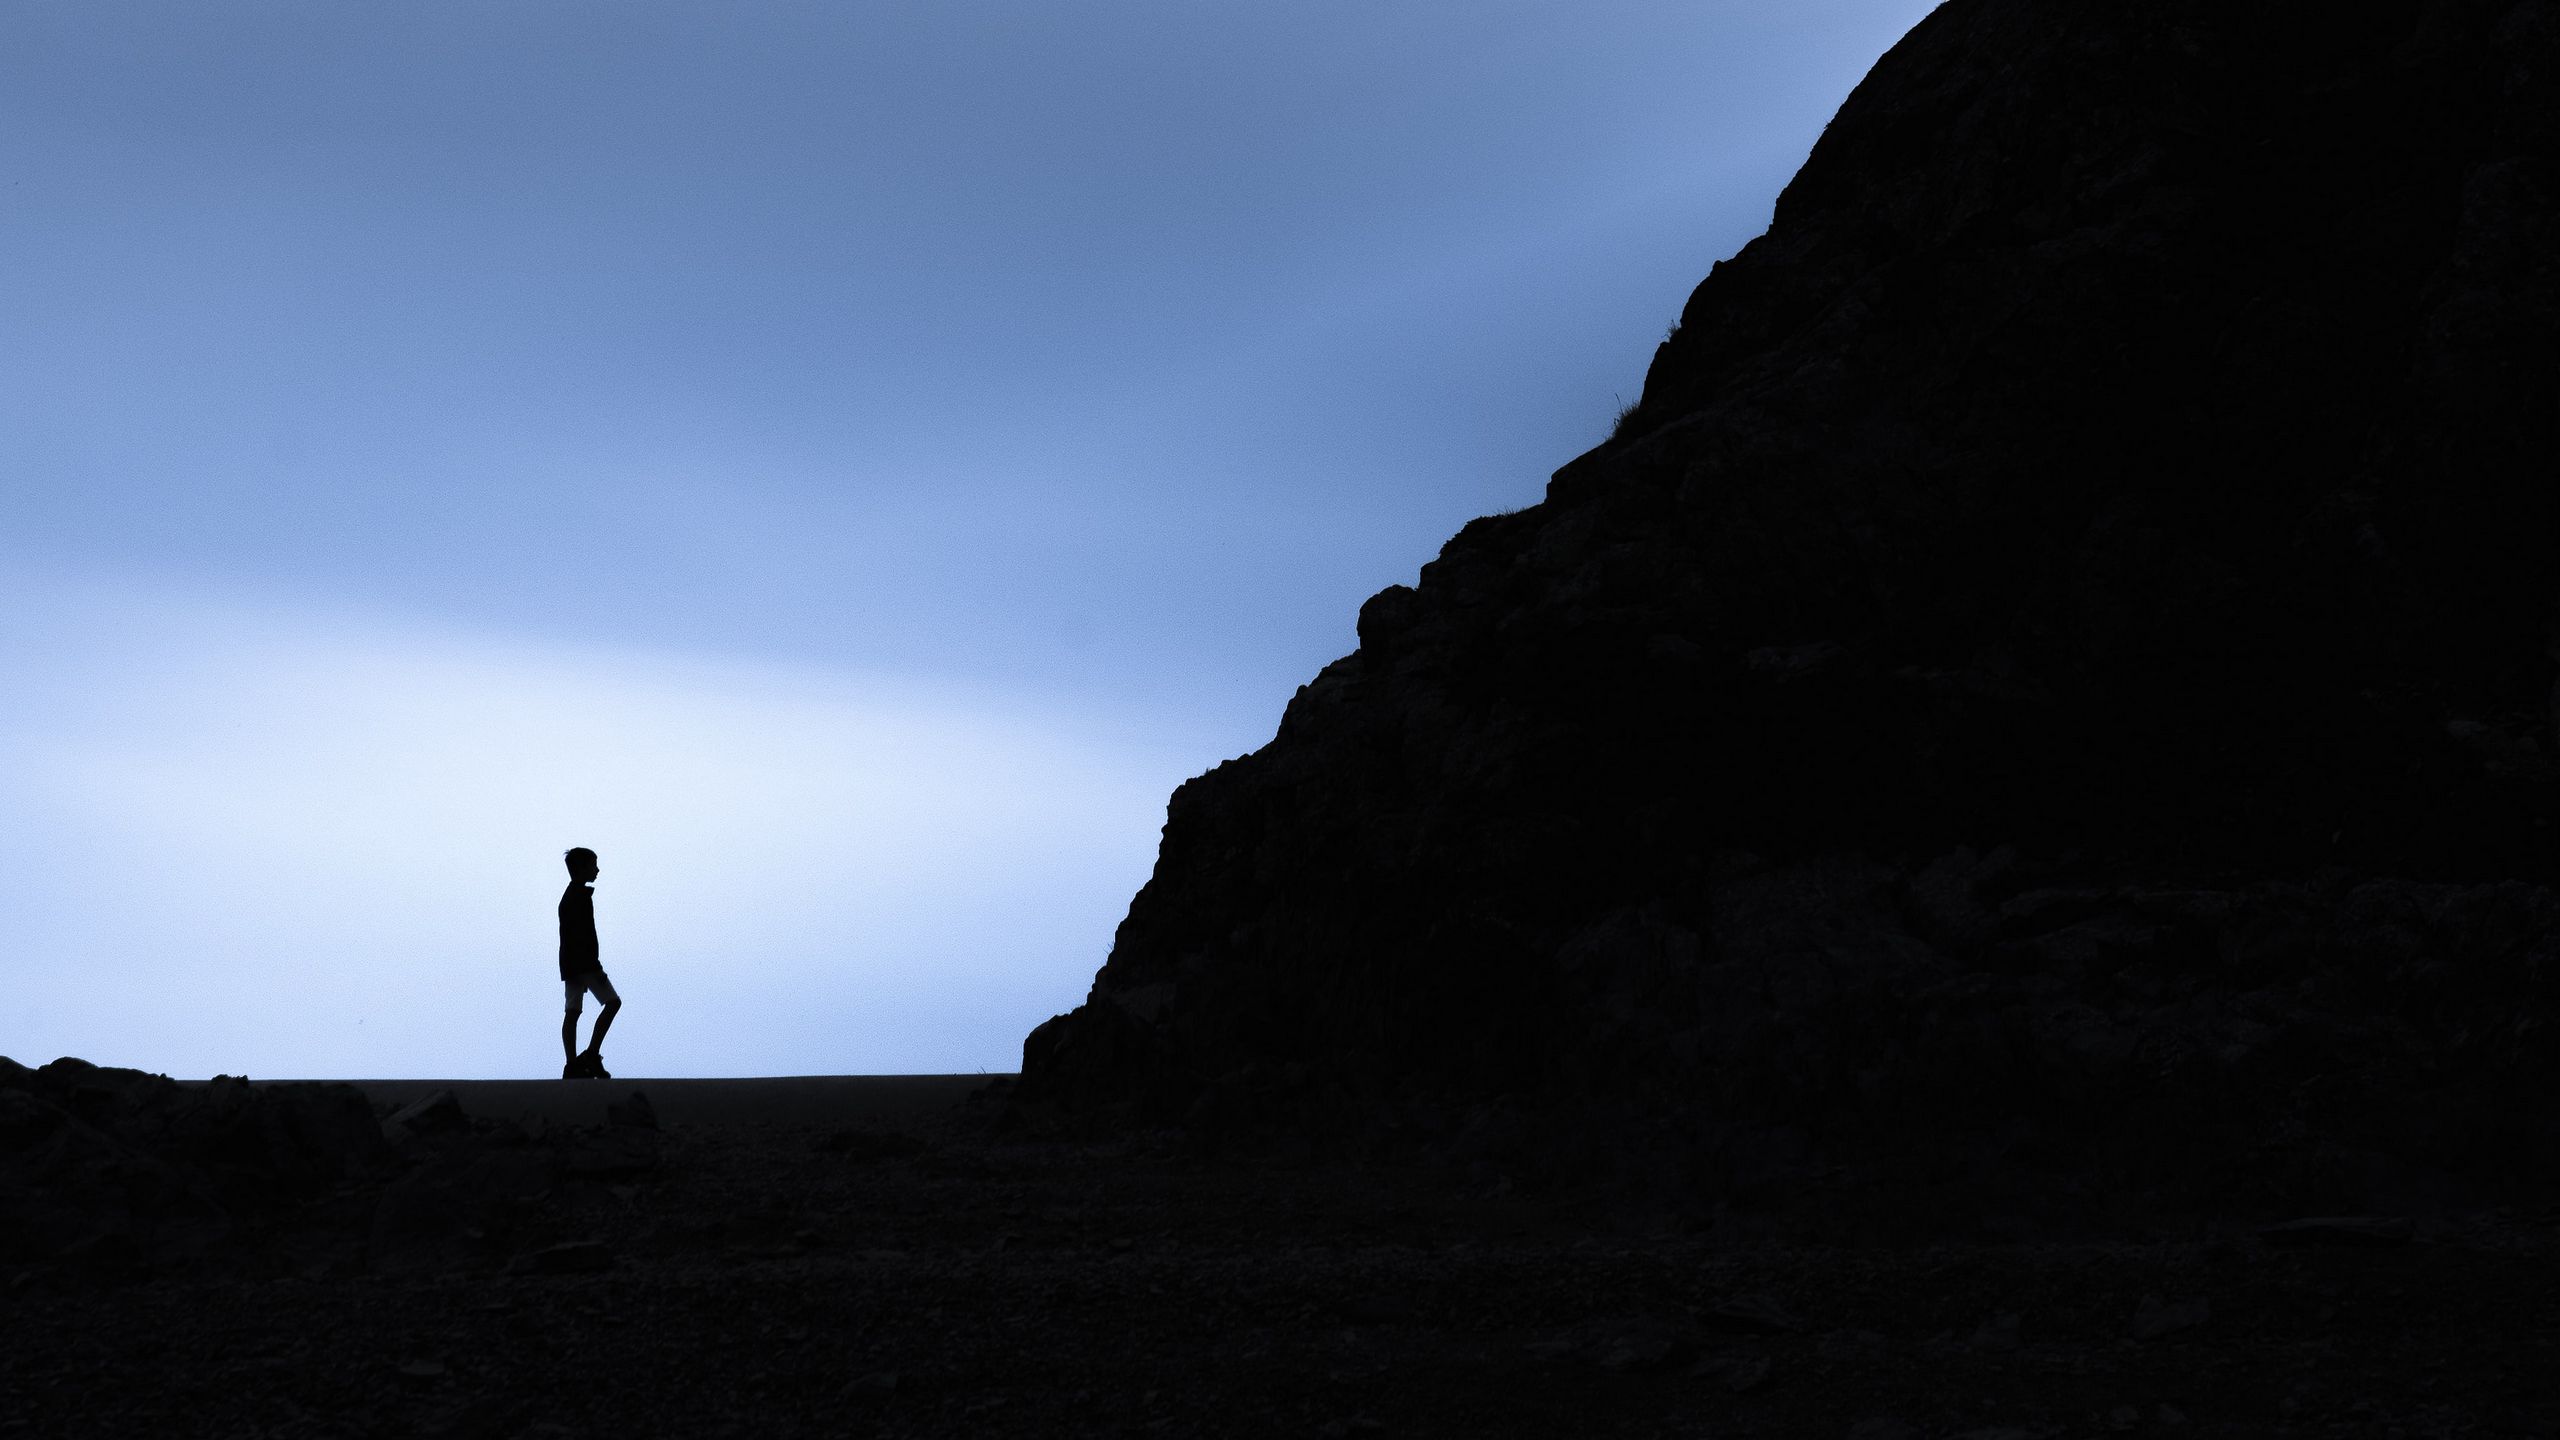 Download Wallpaper 2560x1440 Loneliness Alone Silhouette Mountain